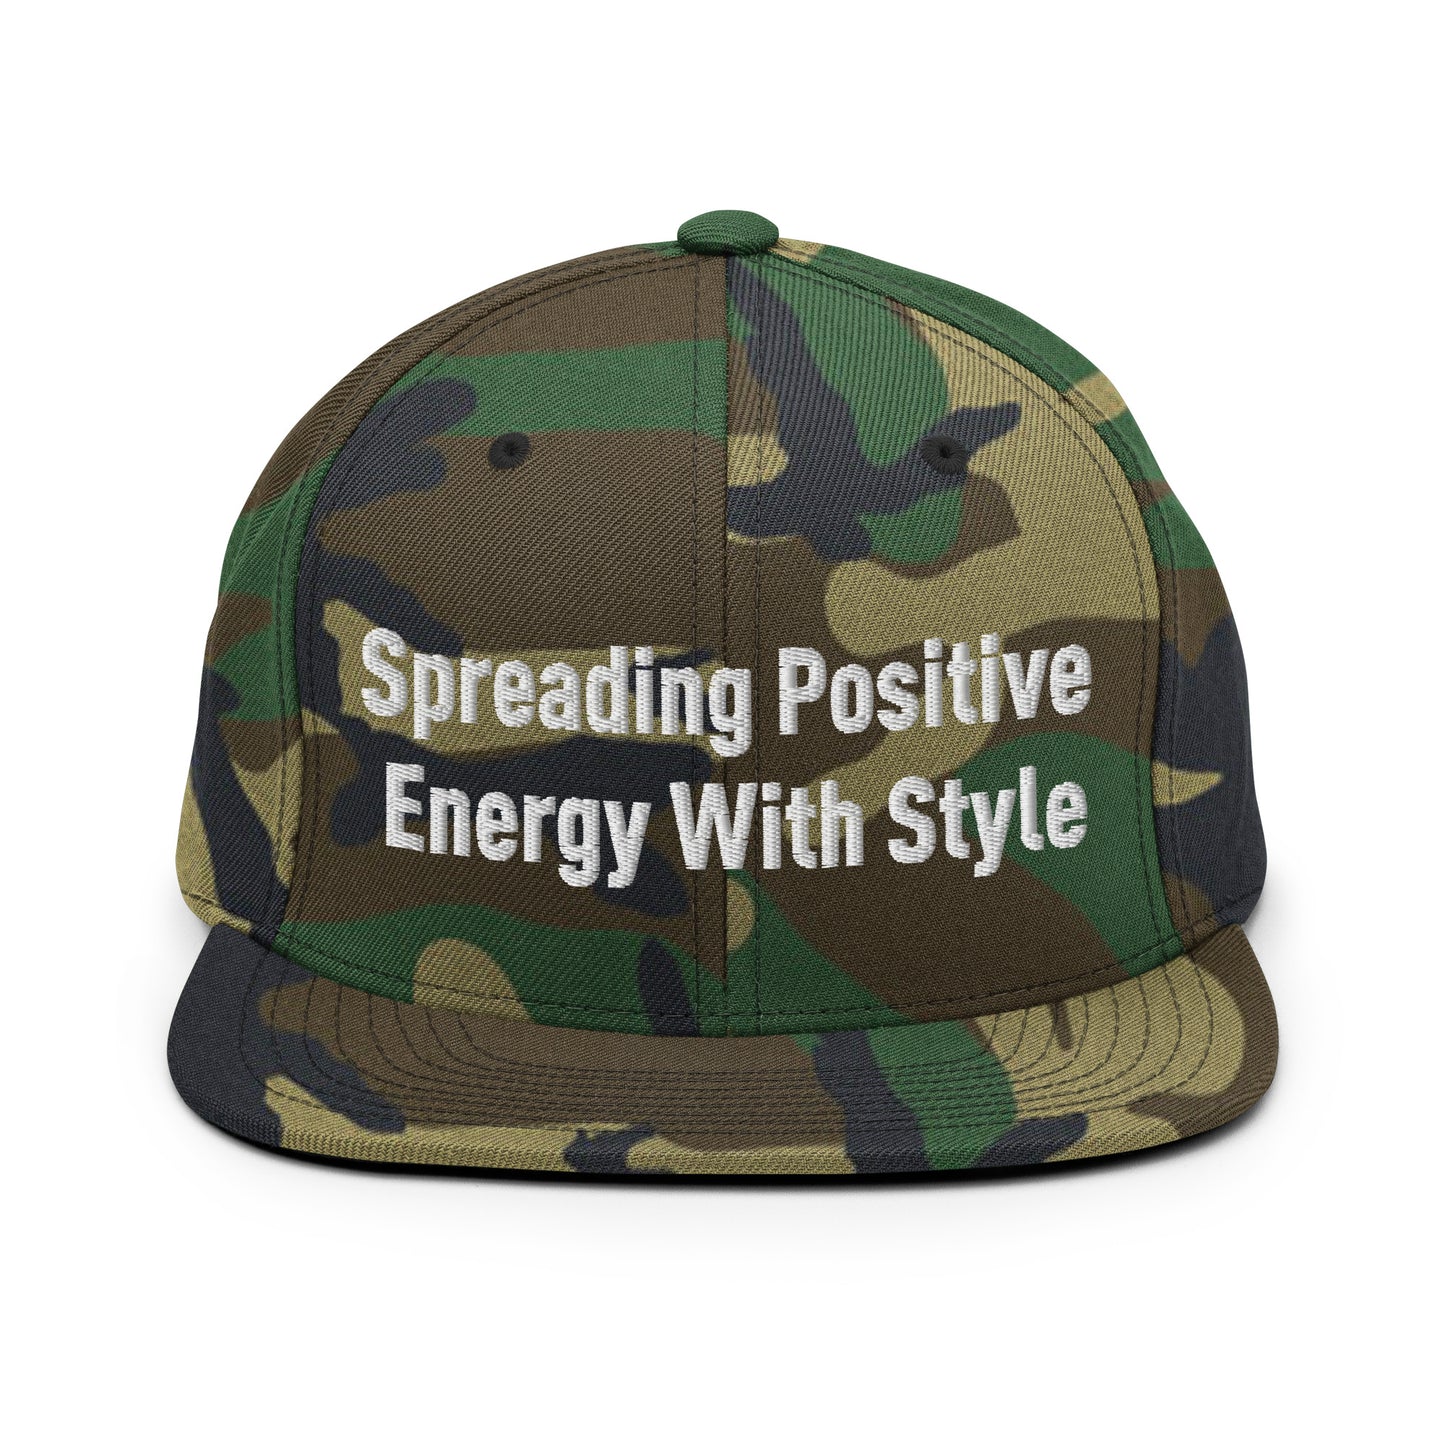 Spreading Positive Energy With Style